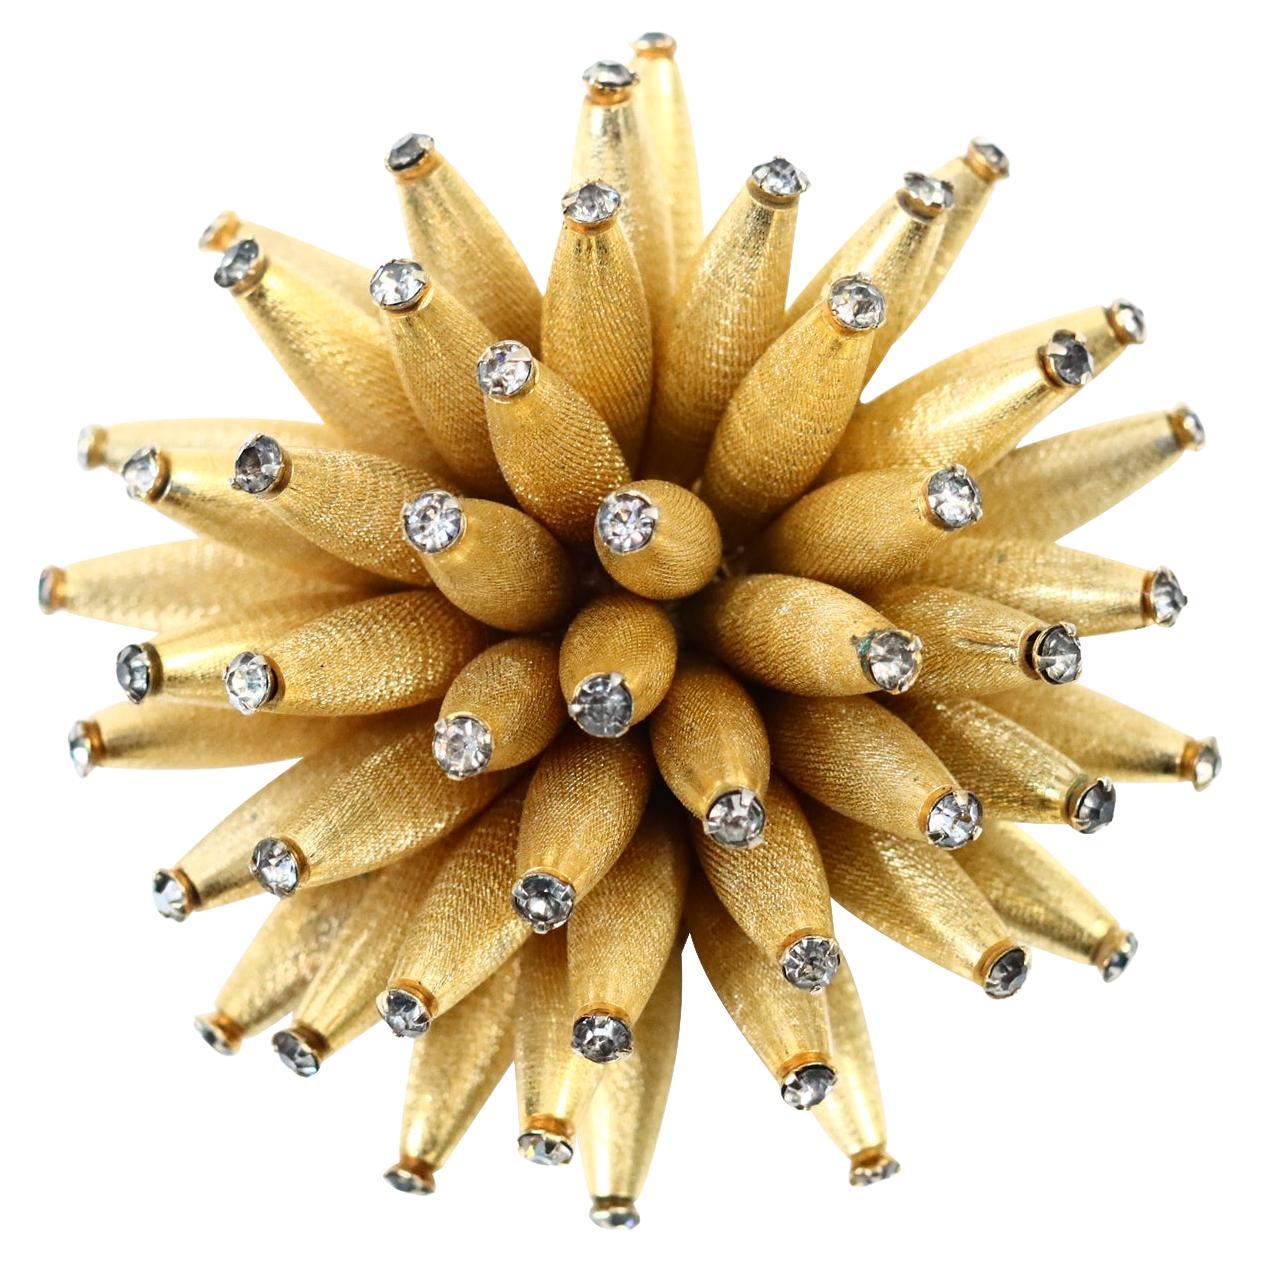 Vintage Vendome Spiky Gold Tone With Diamante Brooch Circa 1970s For Sale